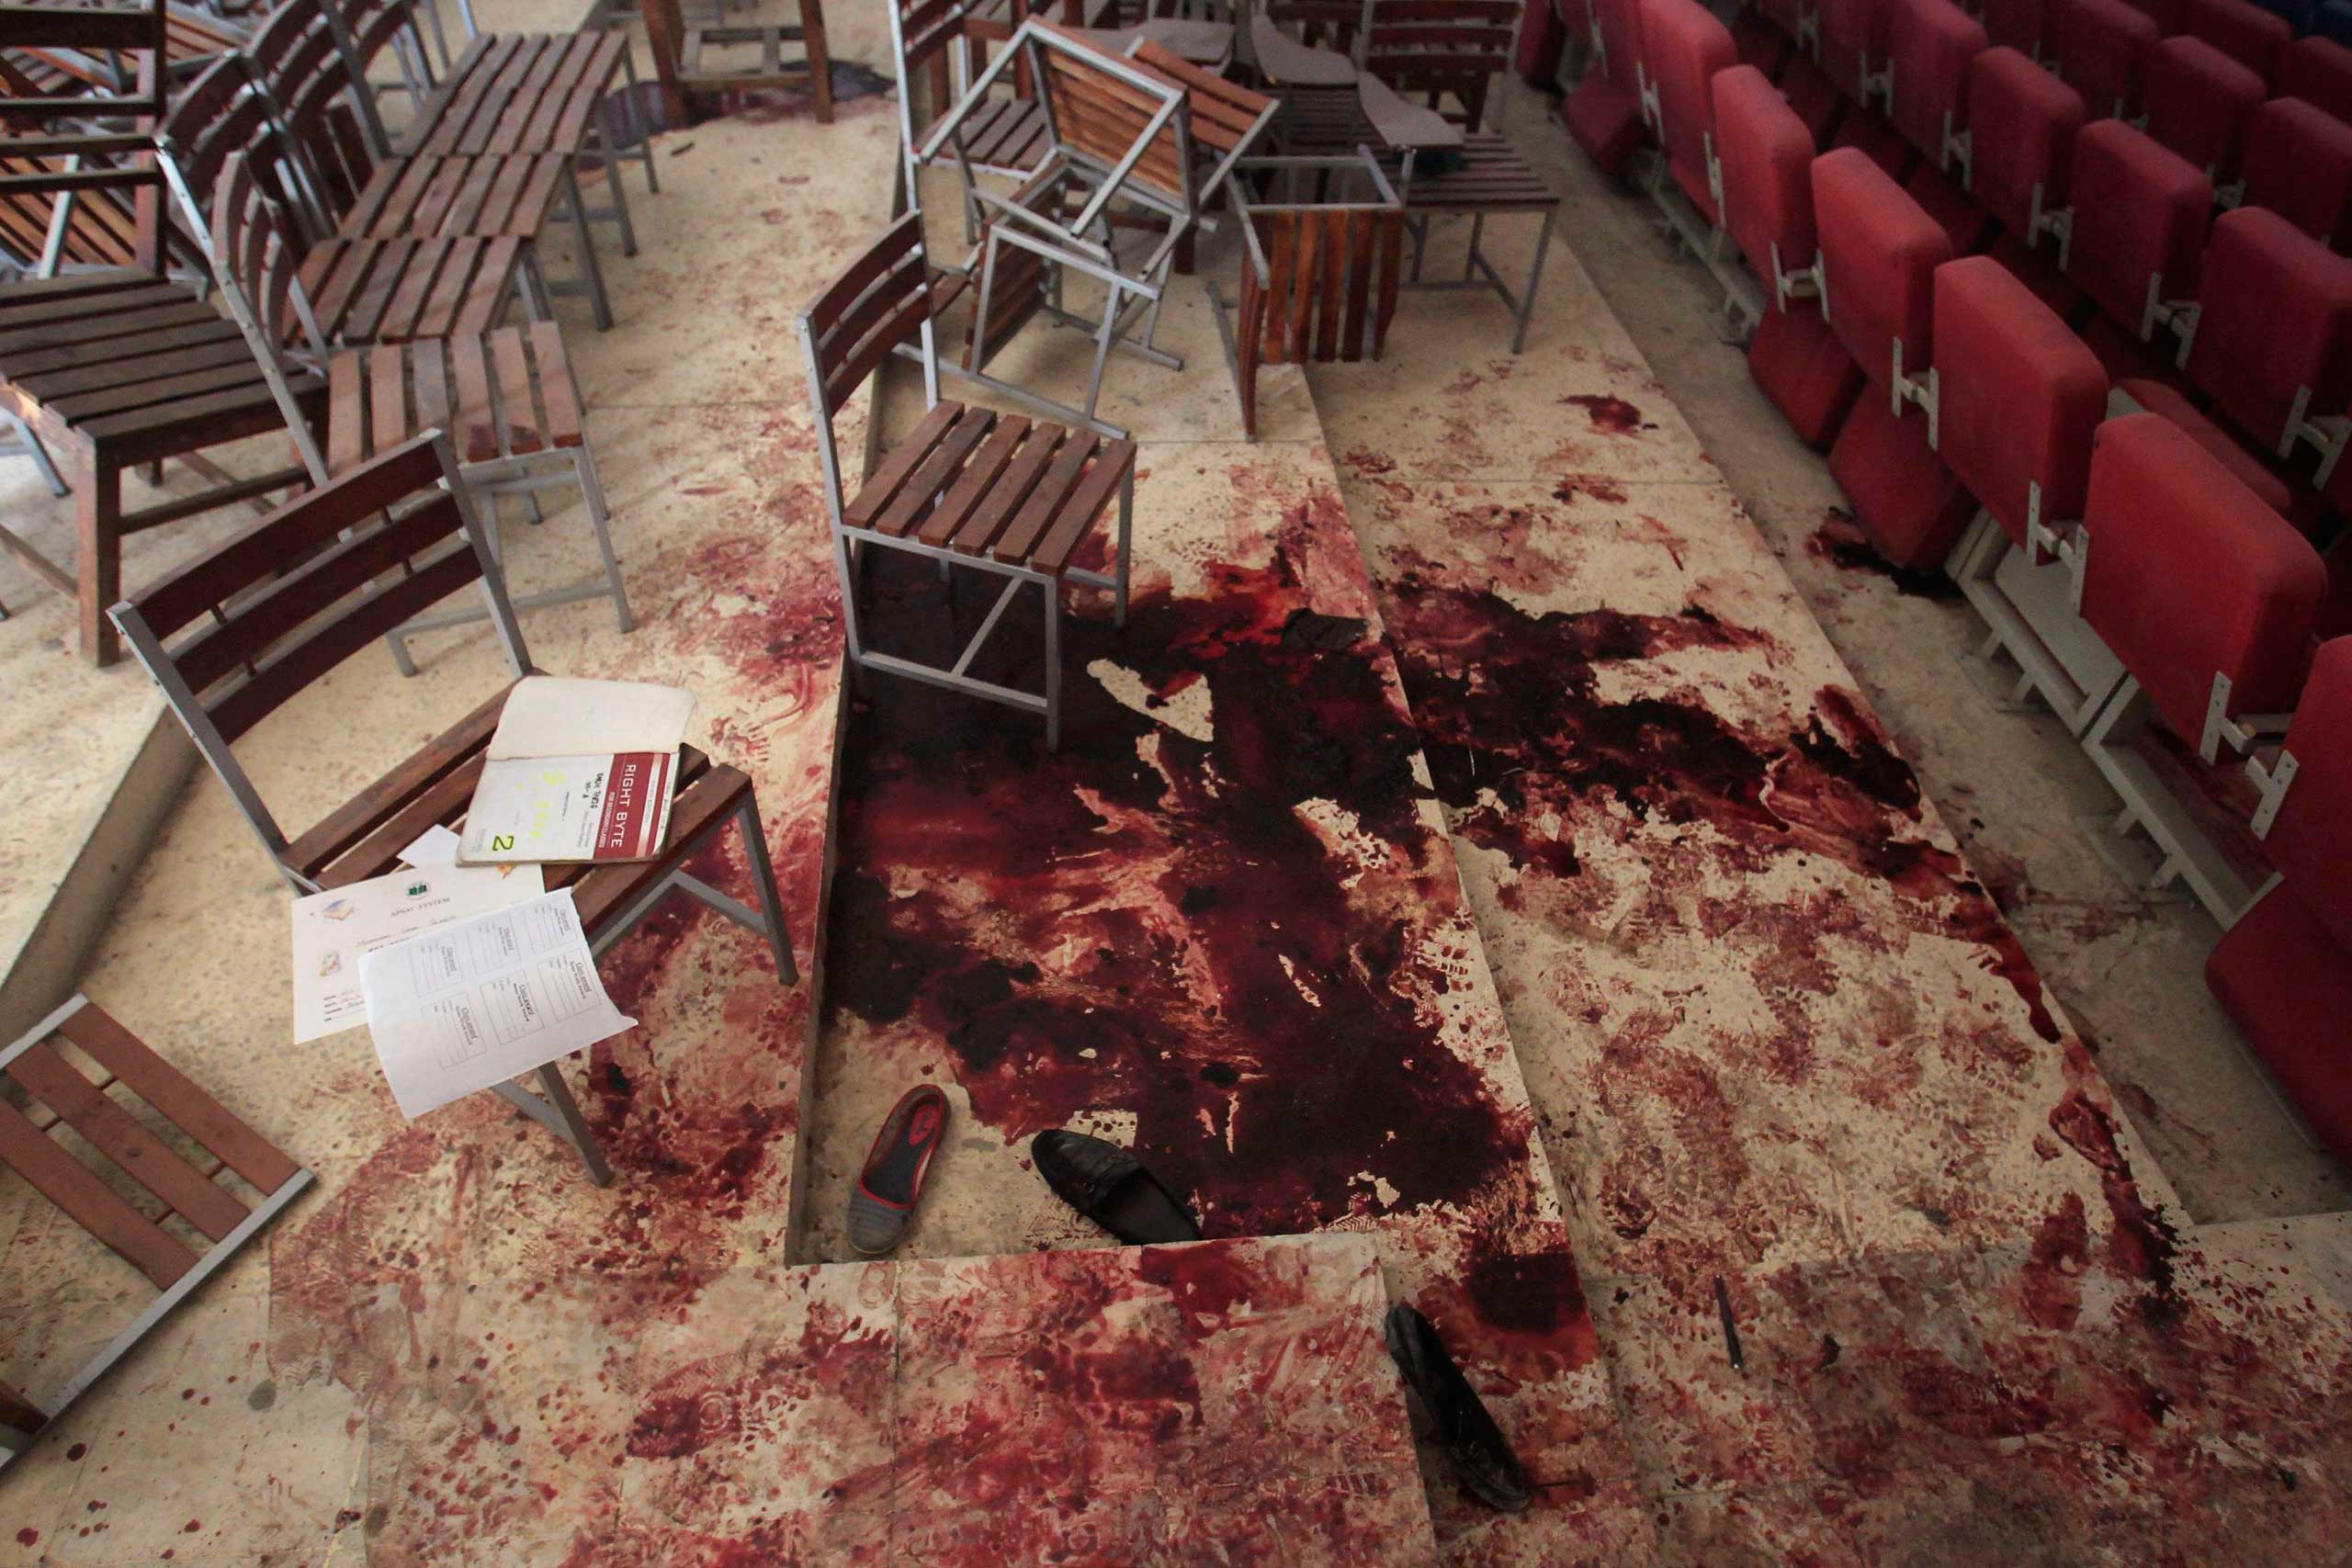 Shoes lie in blood on the auditorium floor at the Army Public School, which was attacked by Taliban gunmen, in Peshawar, Dec. 17, 2014. (Fayaz Aziz—Reuters)